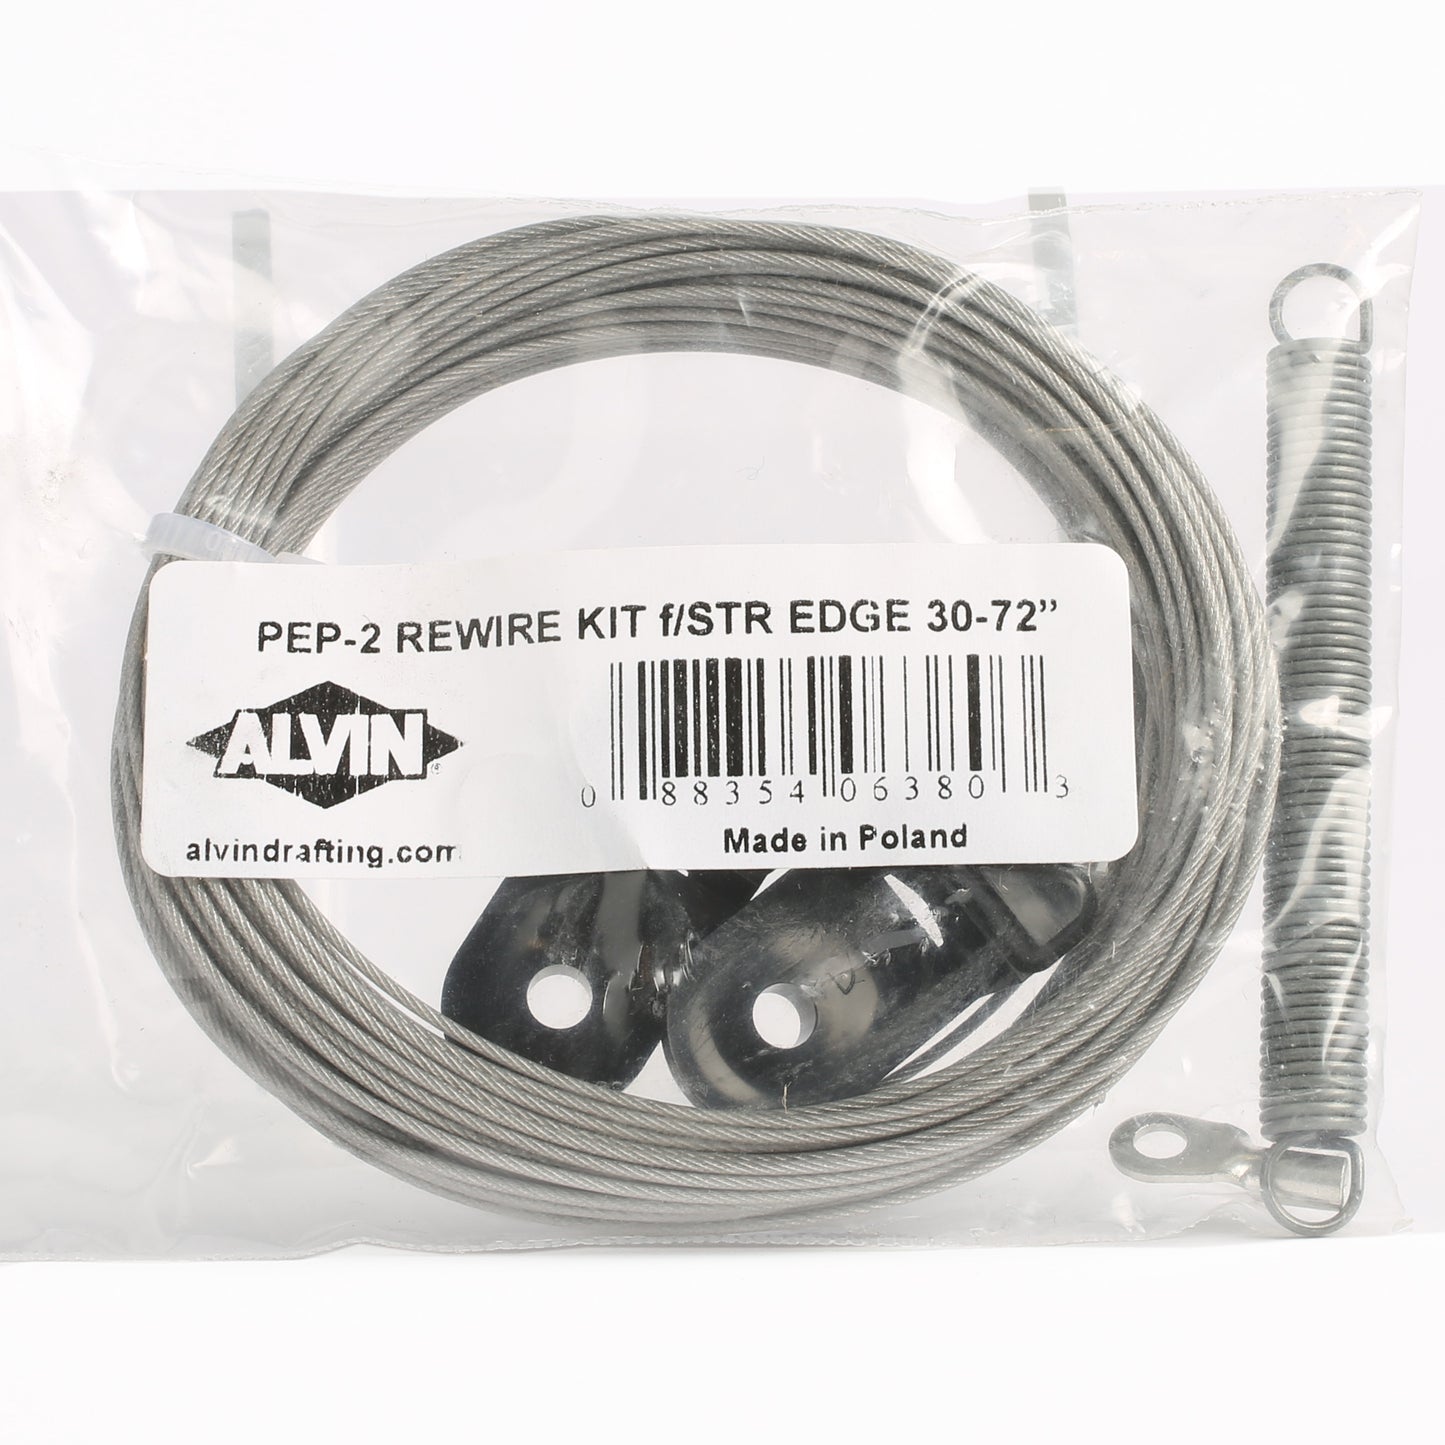 Rewire Kit for Straight Edge 30-72" Models 1101 or 2201